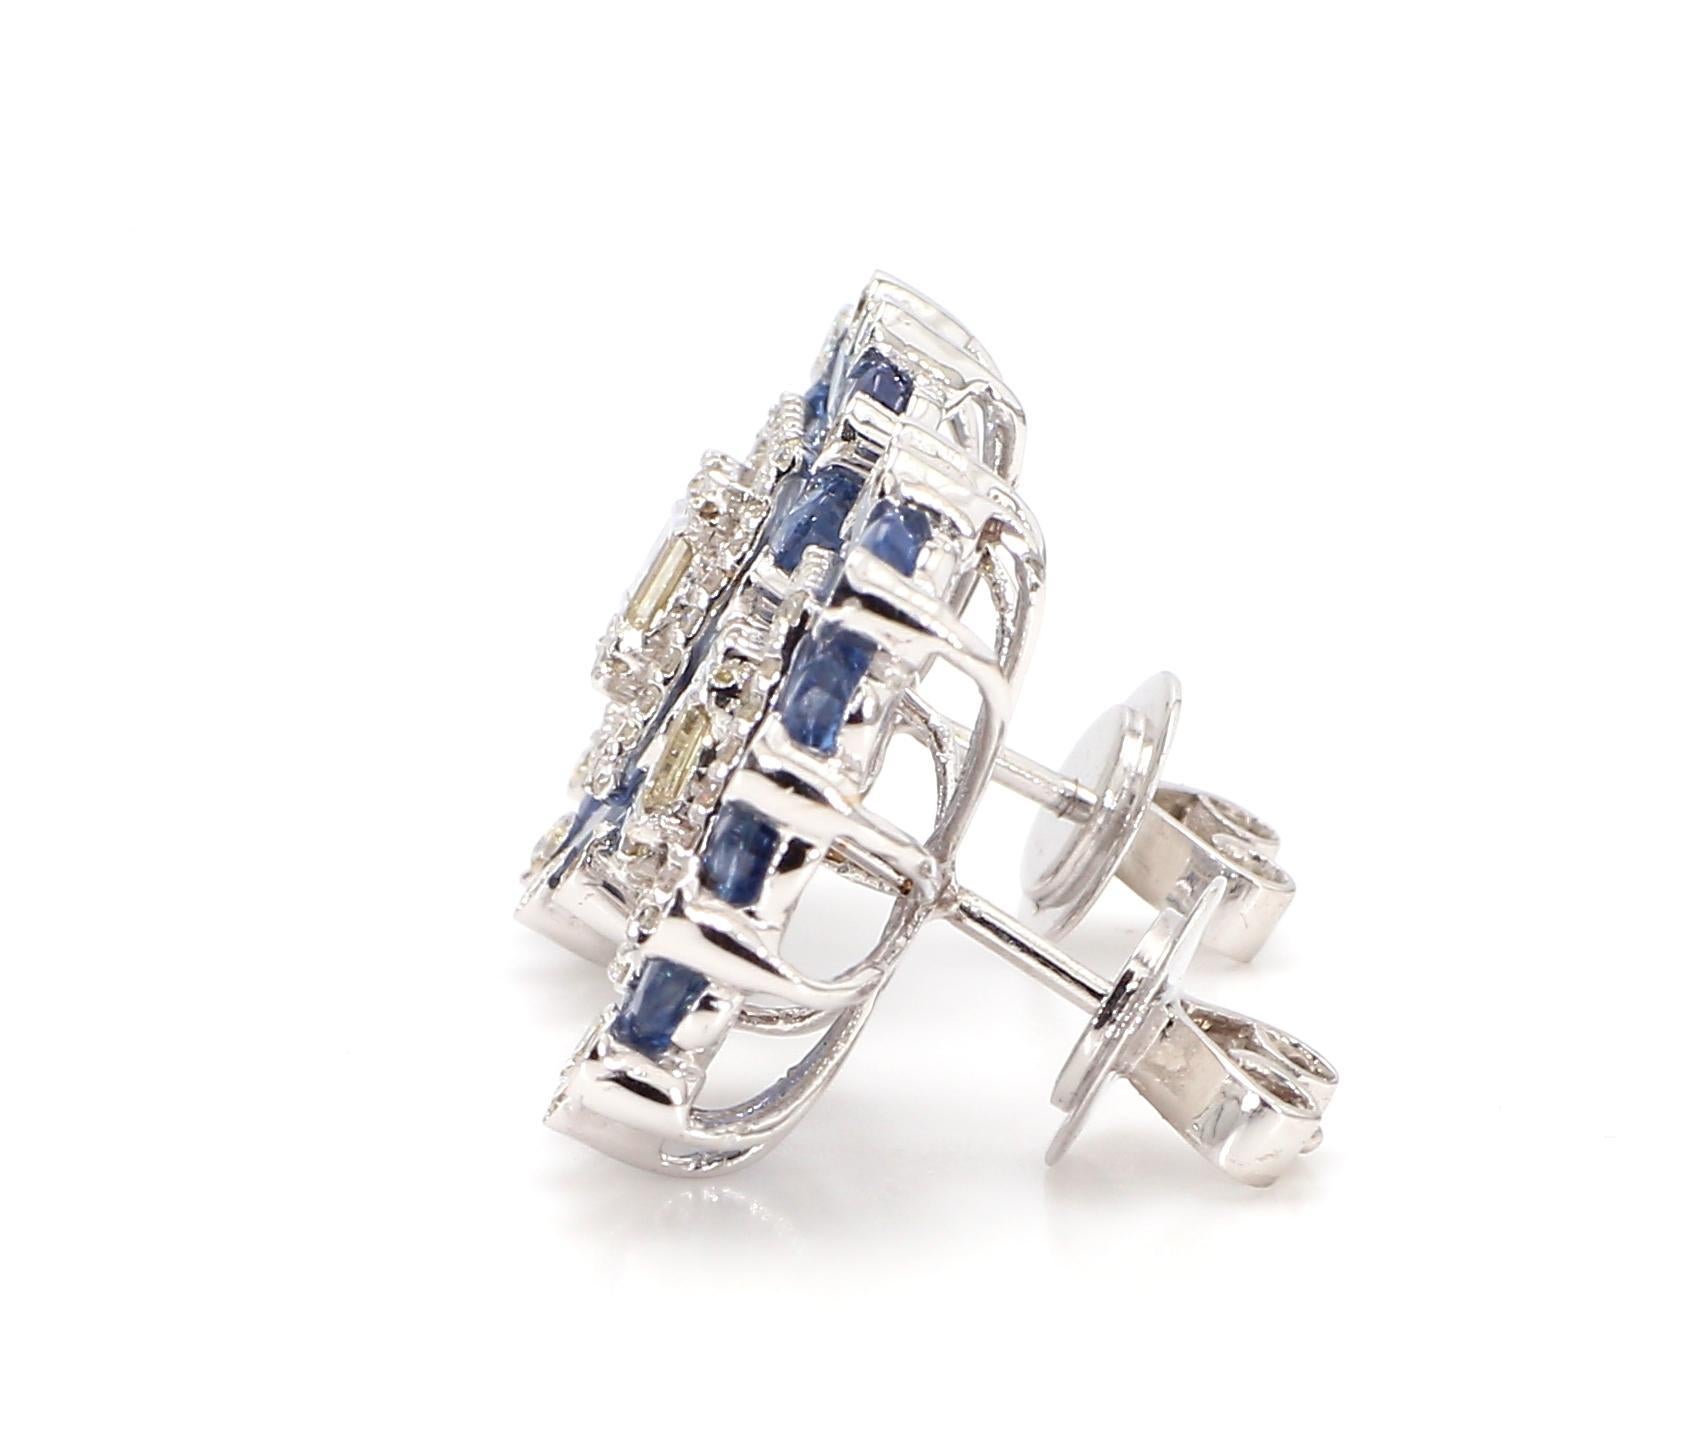 Blue Sapphire Studs are a stunning addition to any jewelry collection. These earrings feature a total weight of 6.36 carats of sapphire stones, with each round cut stone weighing 1.08 carats and a beautiful baguette cut stone measuring 0.33 carats.